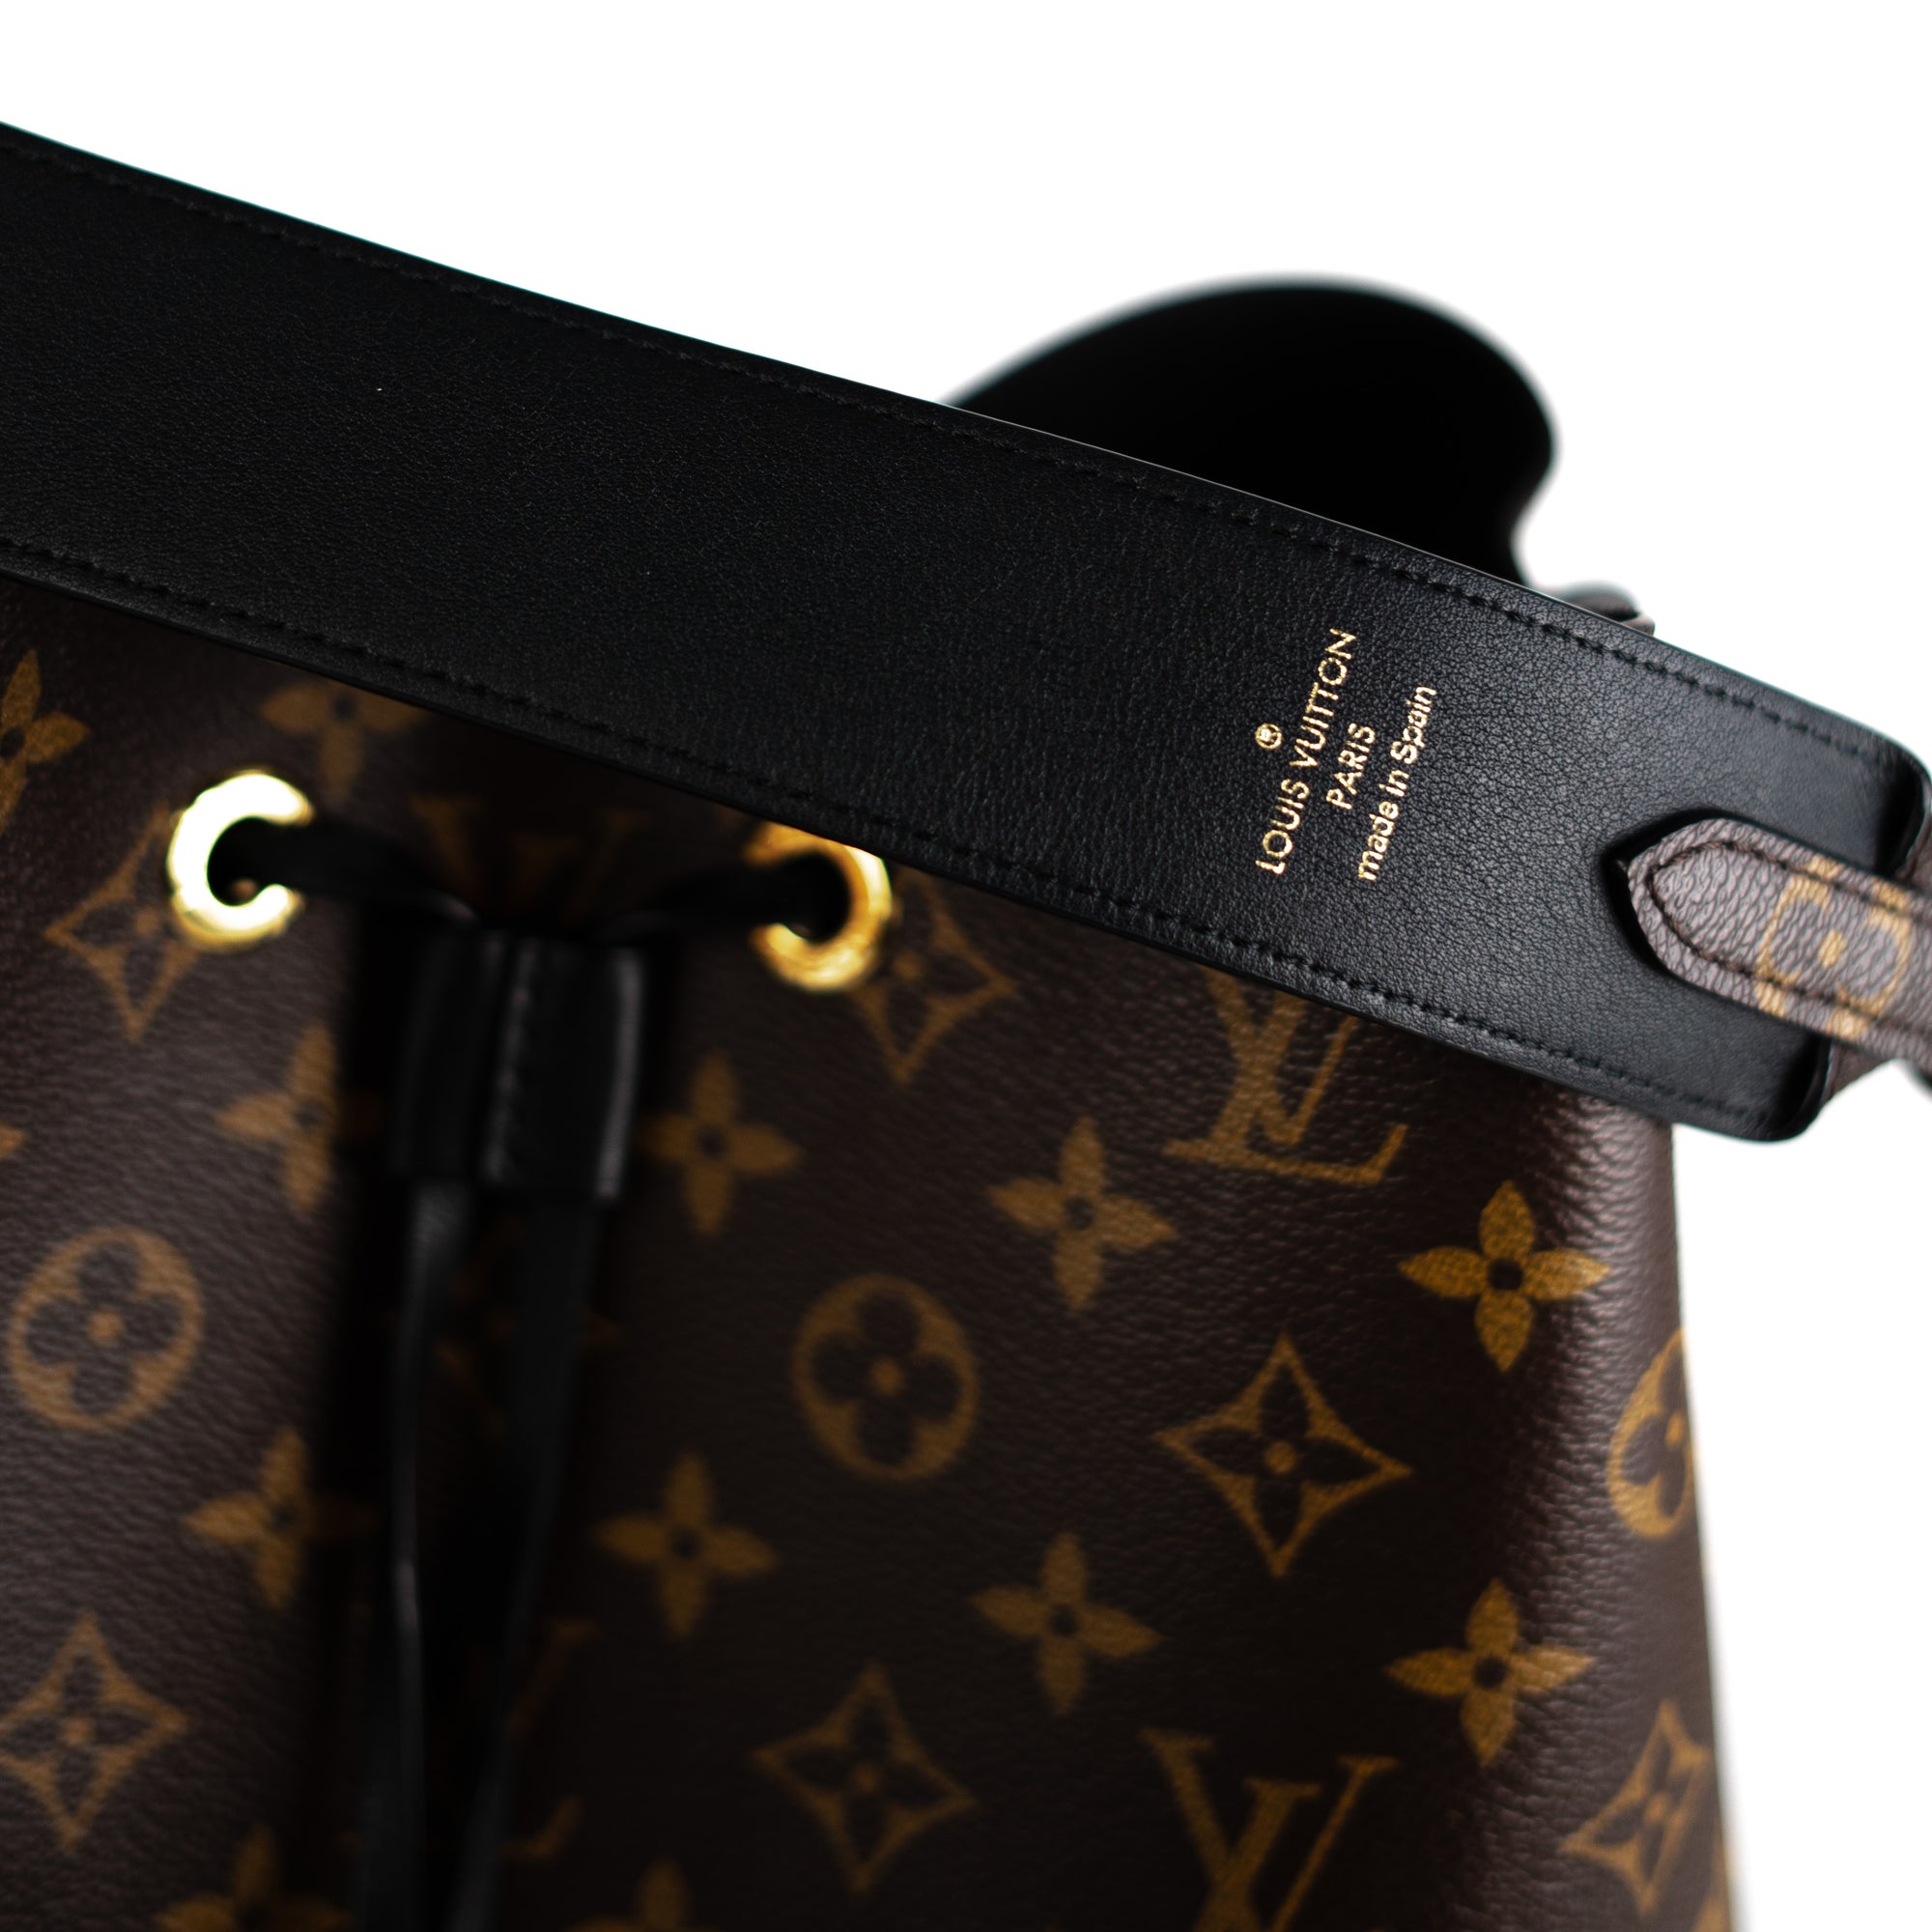 Louis Vuitton Neo Noe Monogram with additional strap - THE PURSE AFFAIR